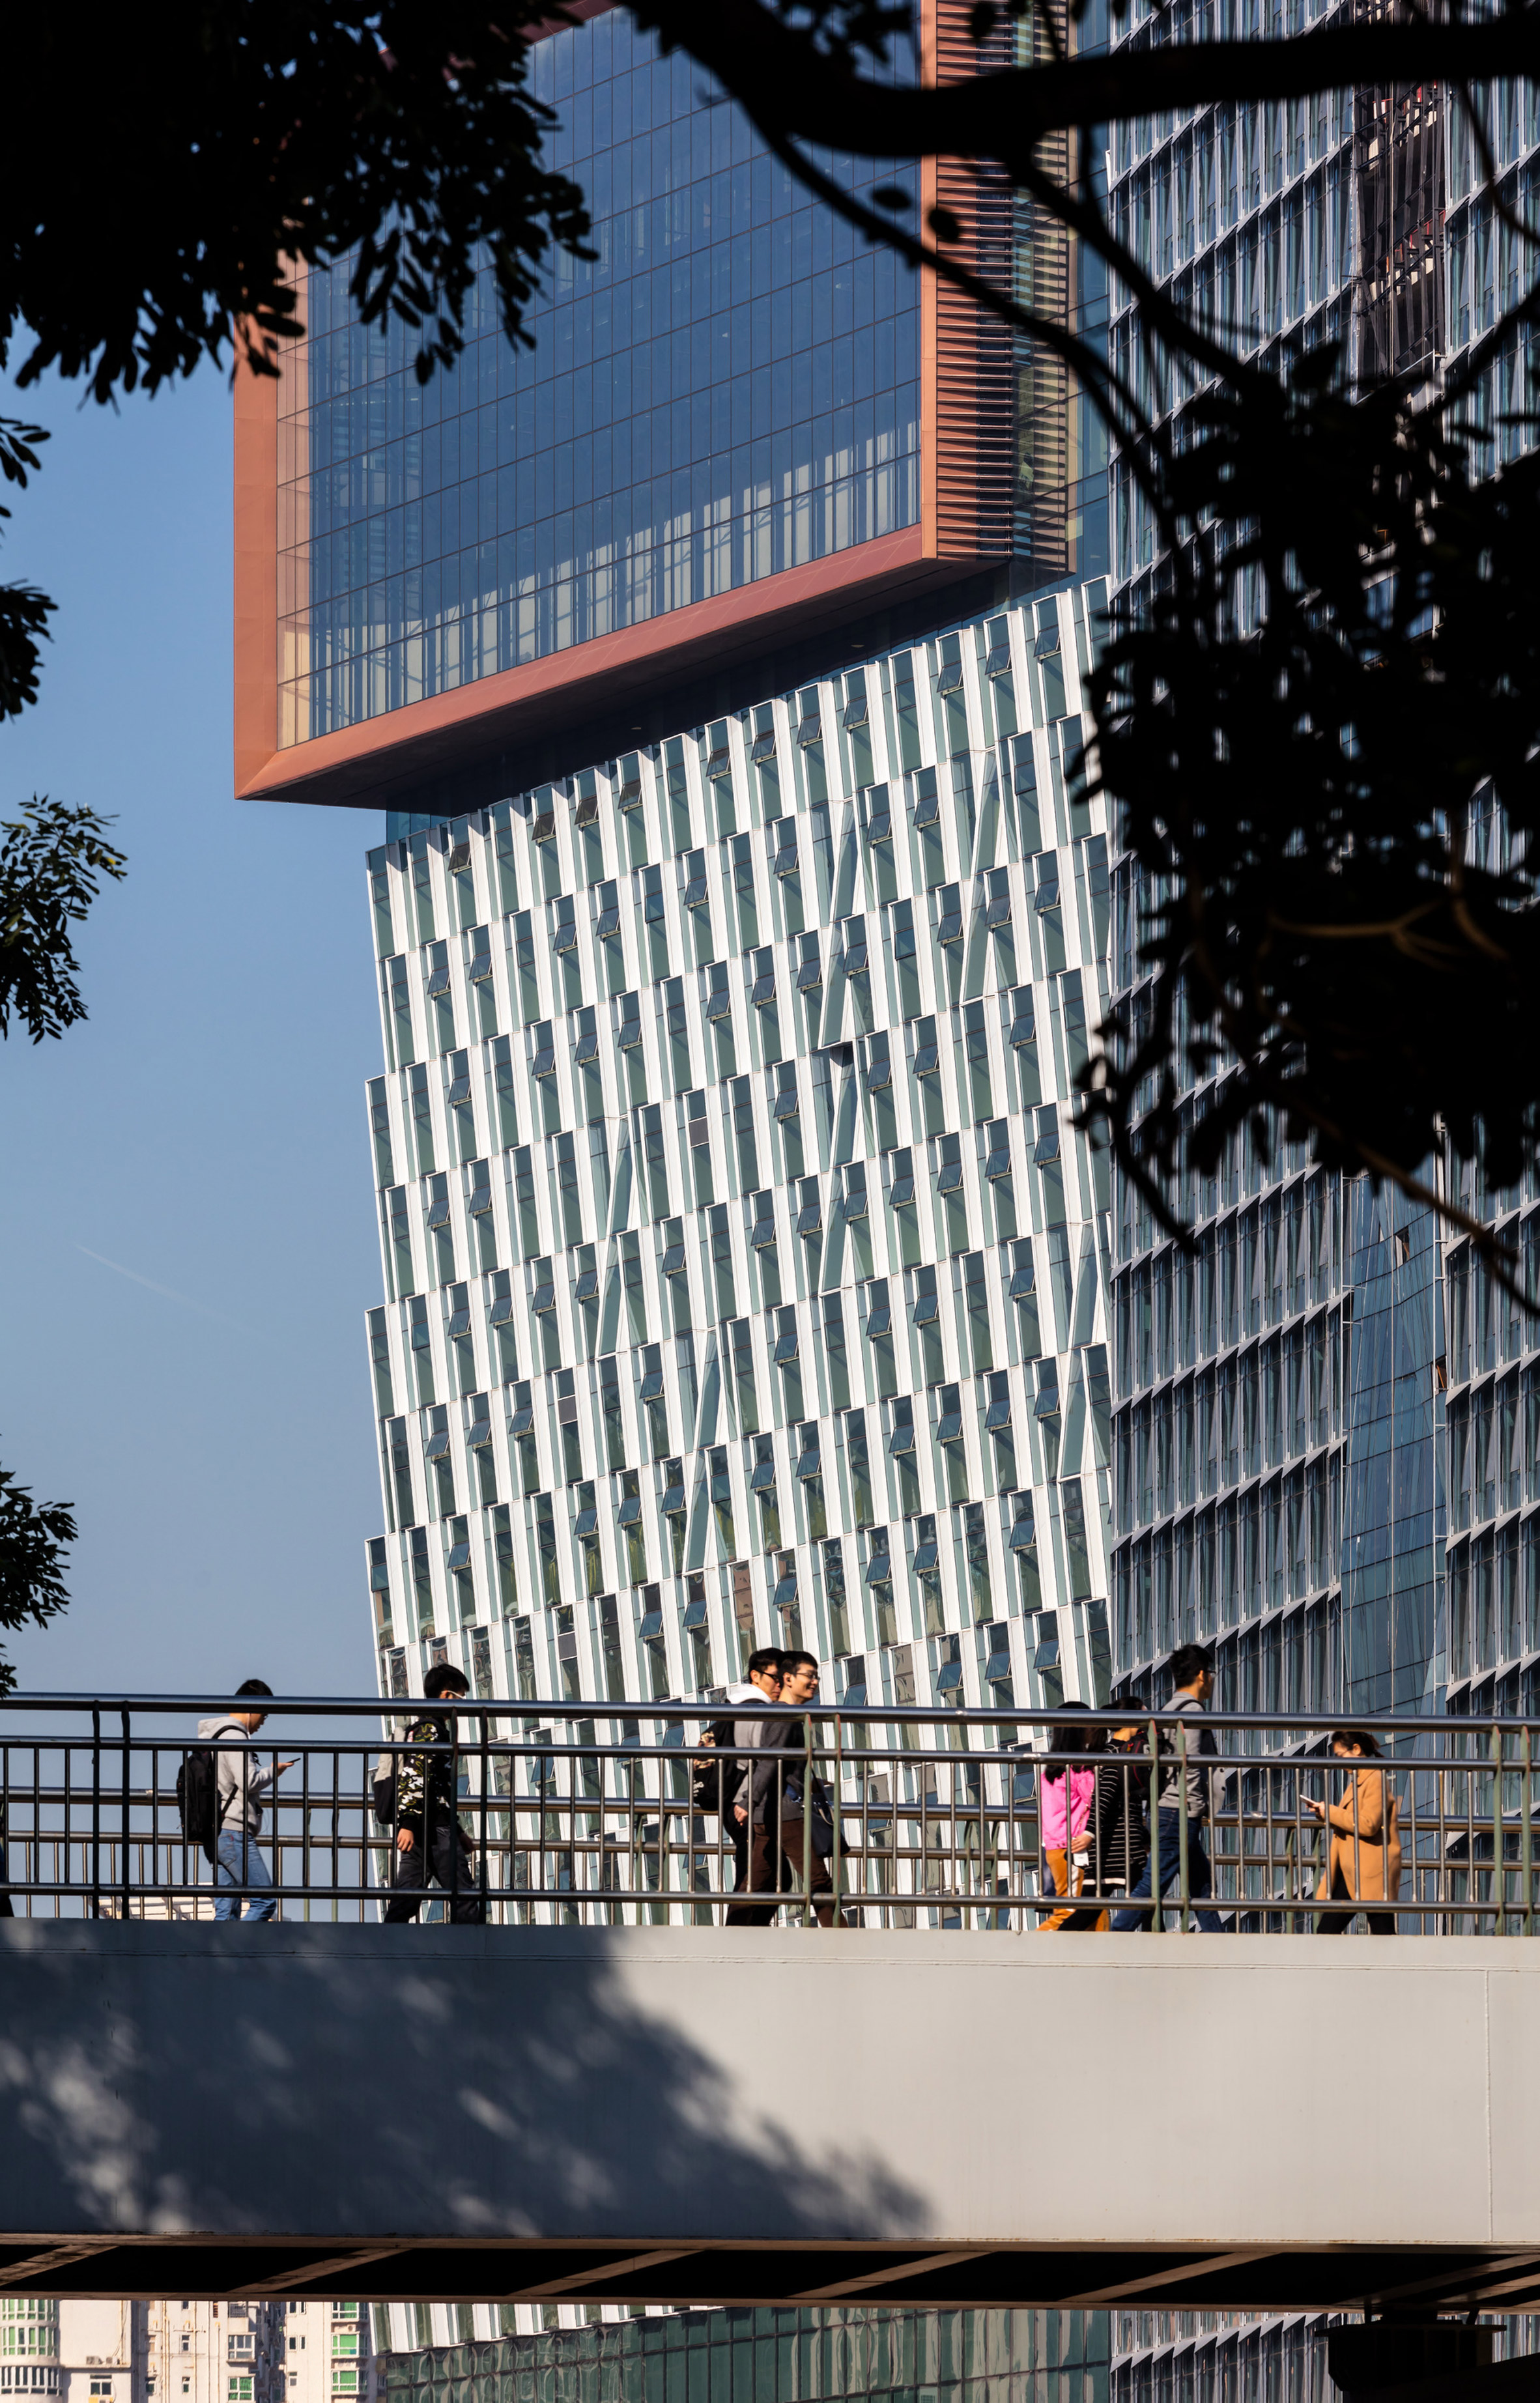 Tencent's Global Headquarters by NBBJ